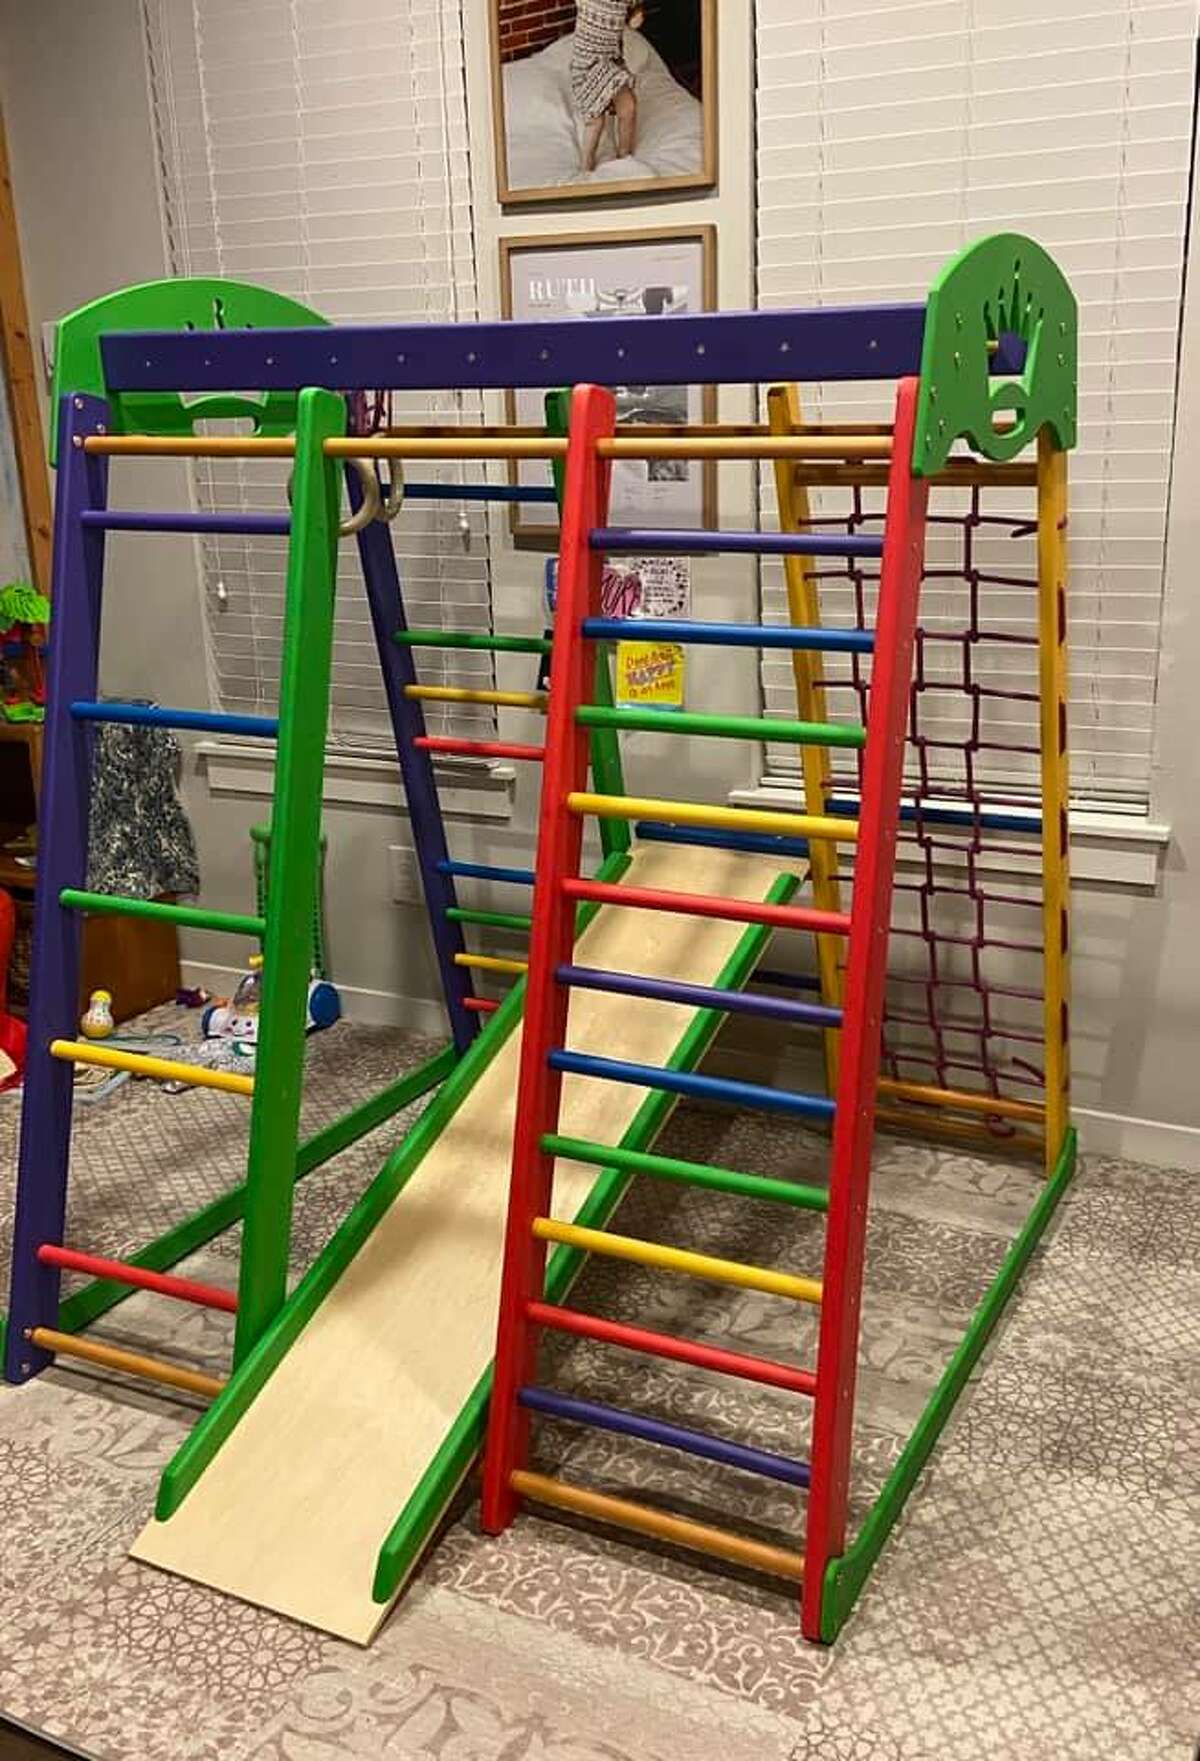 "So glad we realized in March that it was going to be a long while before the kids would have playground access again and grabbed one of these before they were hard to find."